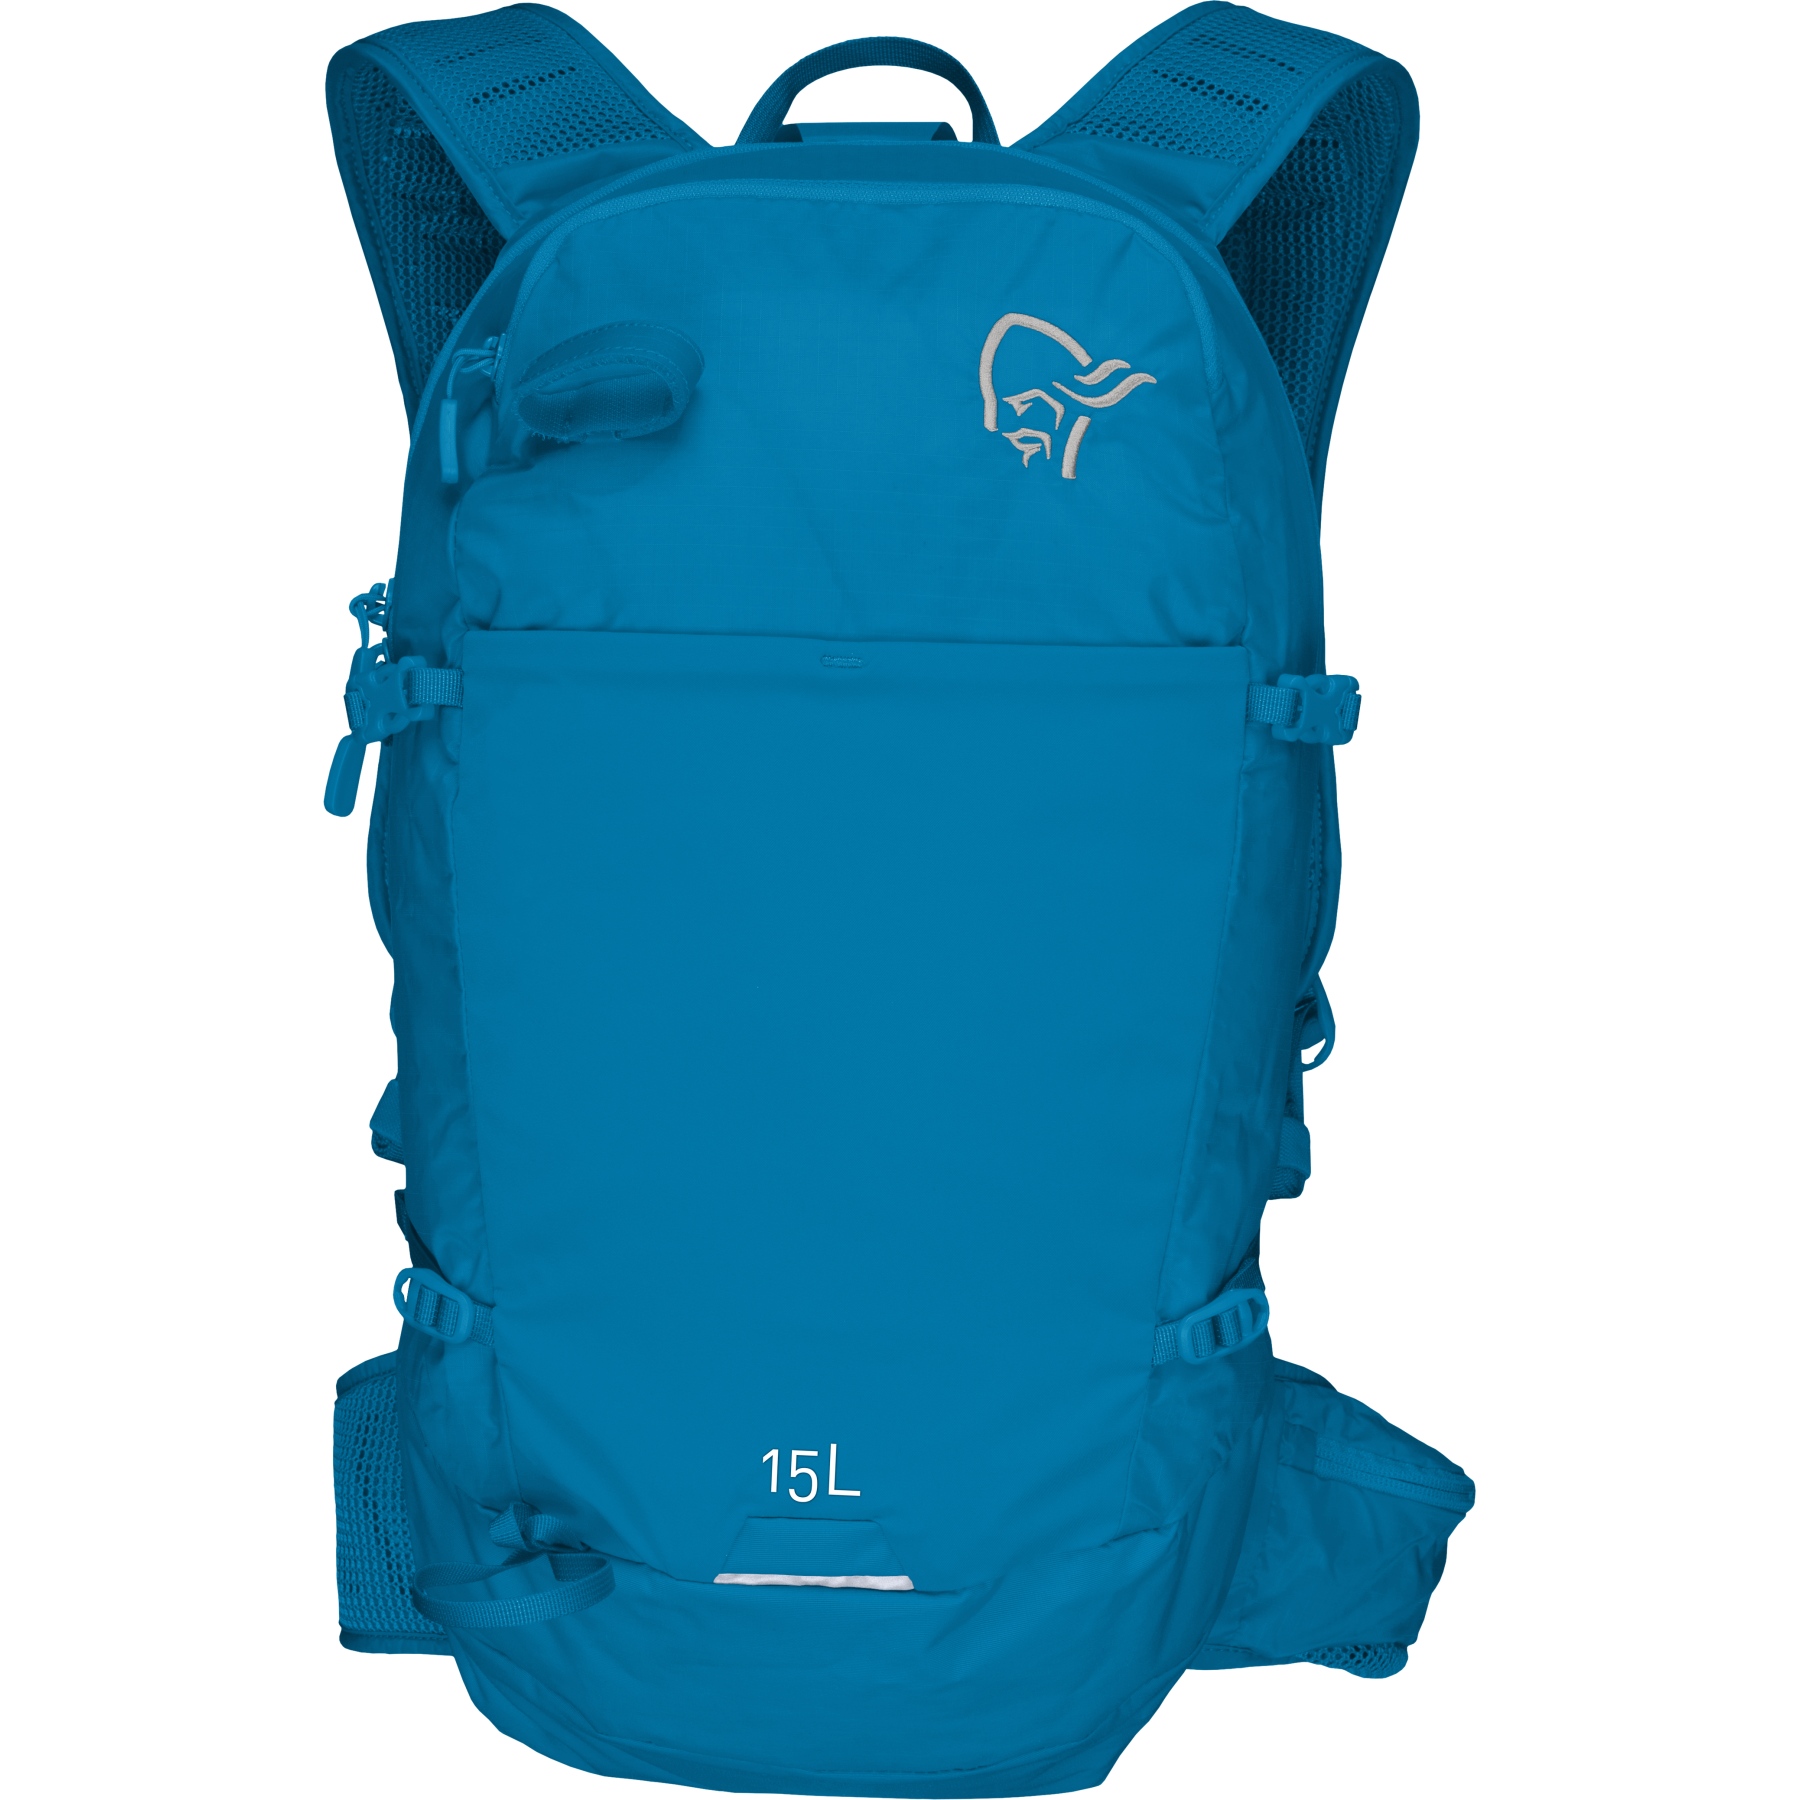 Picture of Norrona 15L Pack - Mykonos Blue